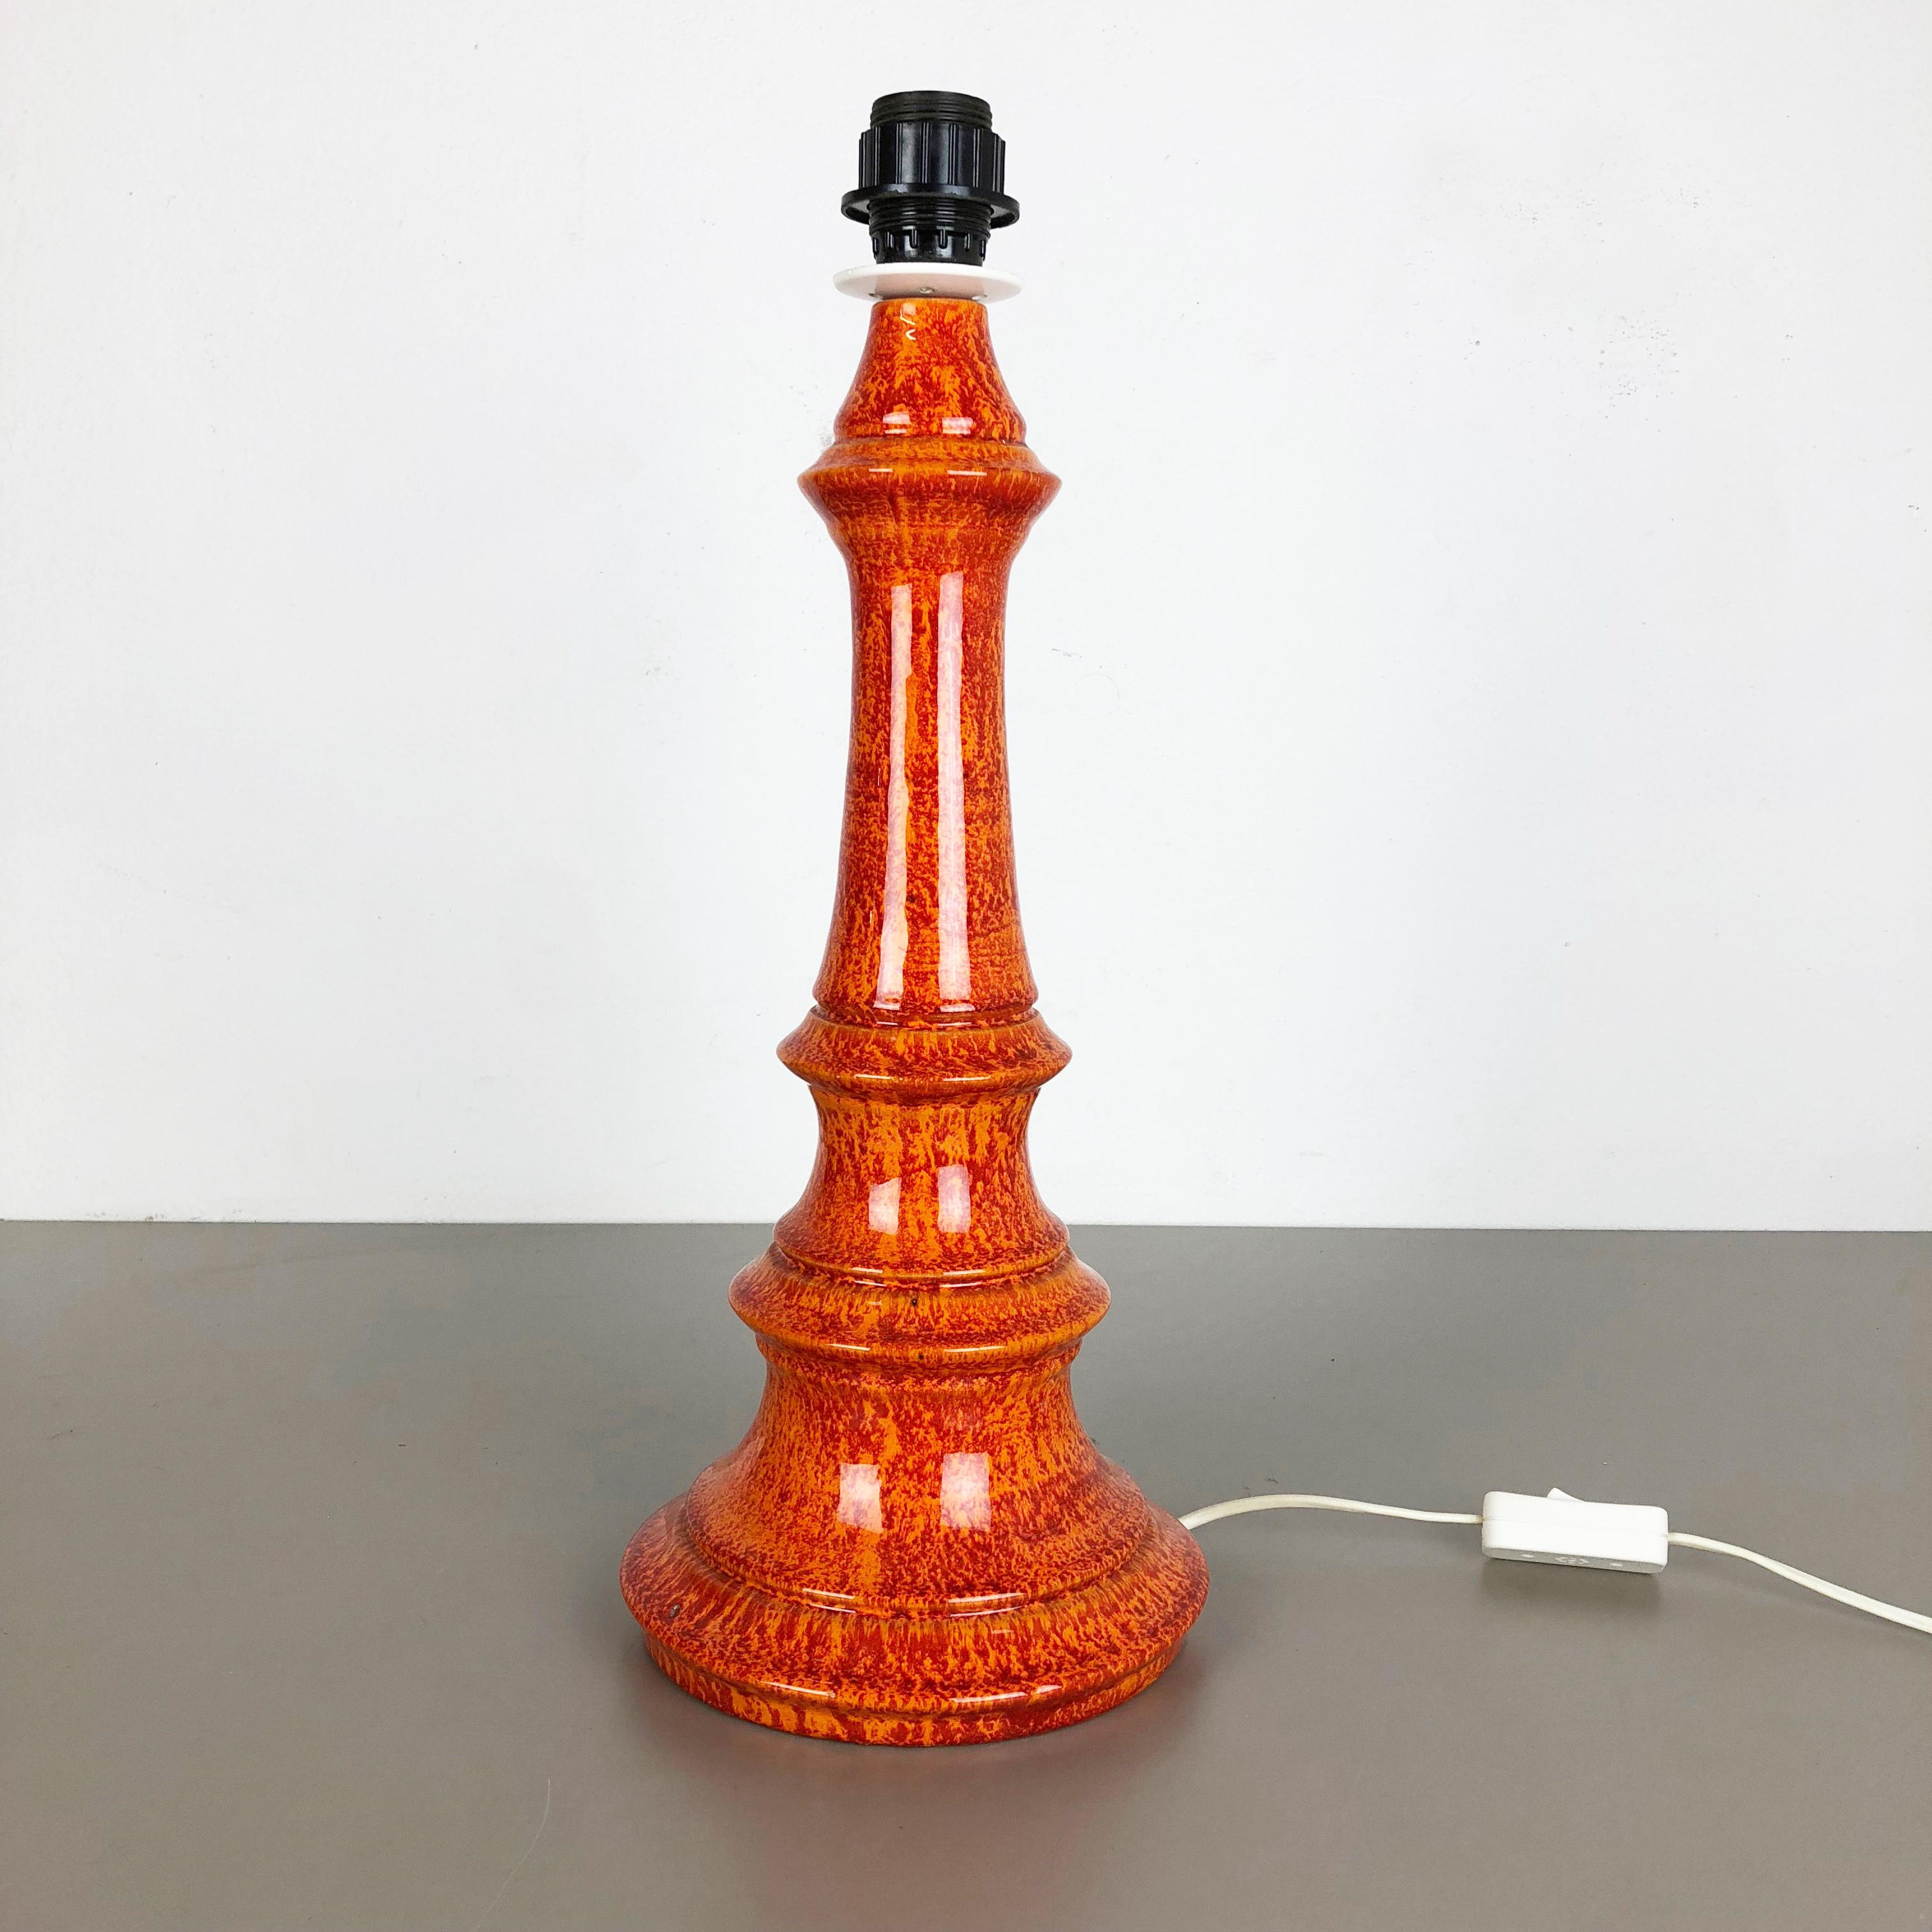 Article:

Fat lava table light base


Producer:

ARO Leuchten, Germany


Decade:

1970s




This original vintage light base was produced in the 1970s by ARO Leuchten in Germany. It is made of ceramic pottery in fat lava optic.